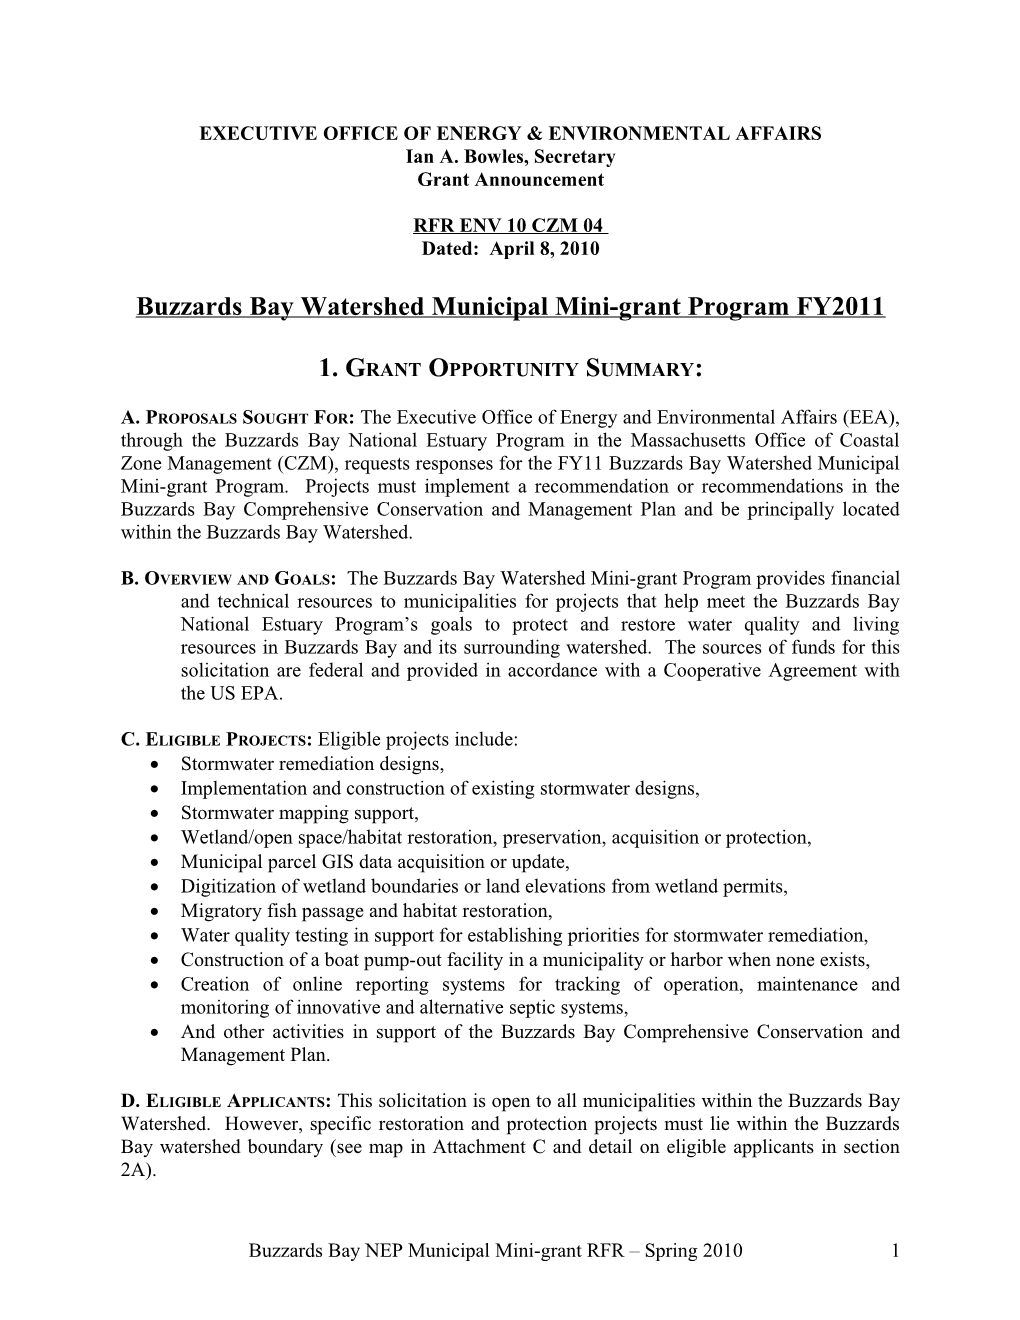 REQUEST for RESPONSES Buzzards Bay Municipal Grant FY09